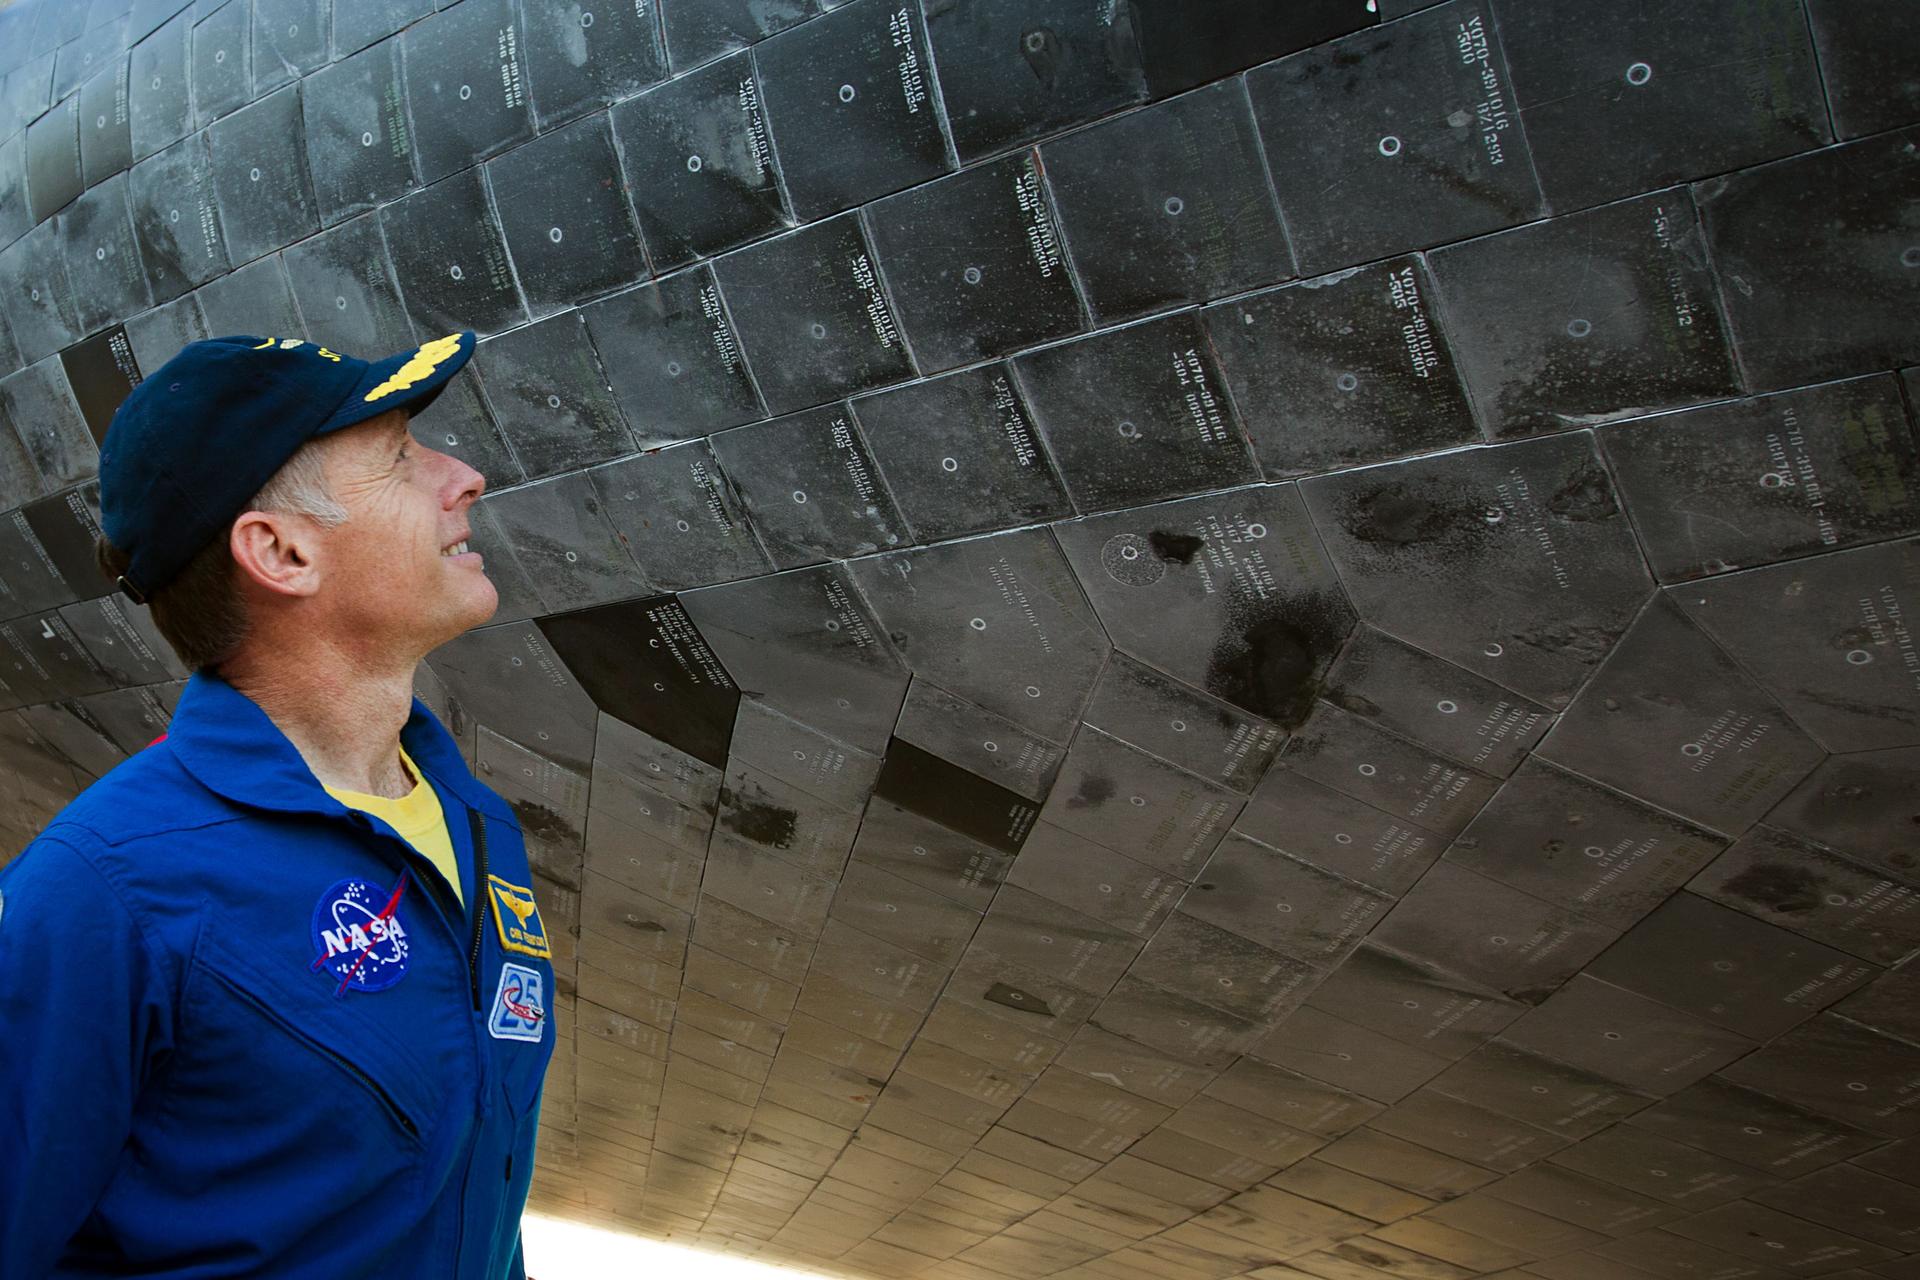 Chris Ferguson, STS-135 commander, examines the thermal tiles of the orbiter after the space shuttle Atlantis completed the final mission of the NASA shuttle program in 2011.